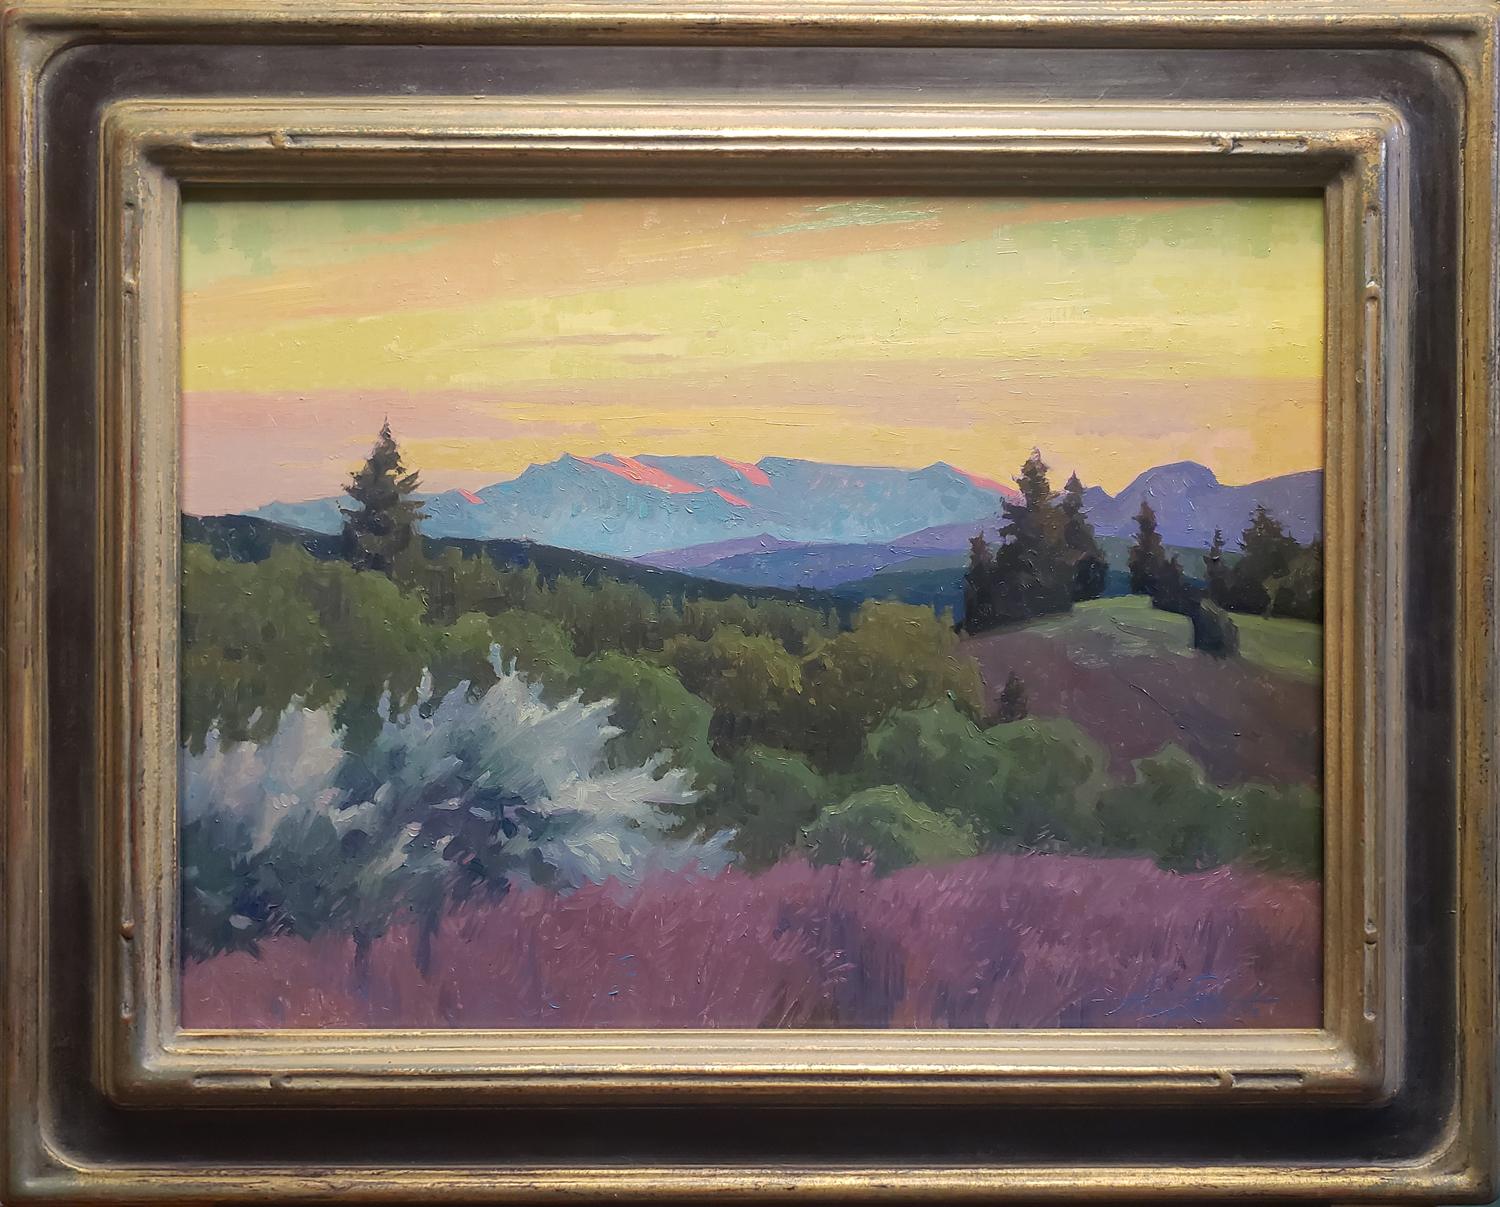 Sunrise at Camp Big Horn; Lake Arrowhead - Painting by Alexey Steele